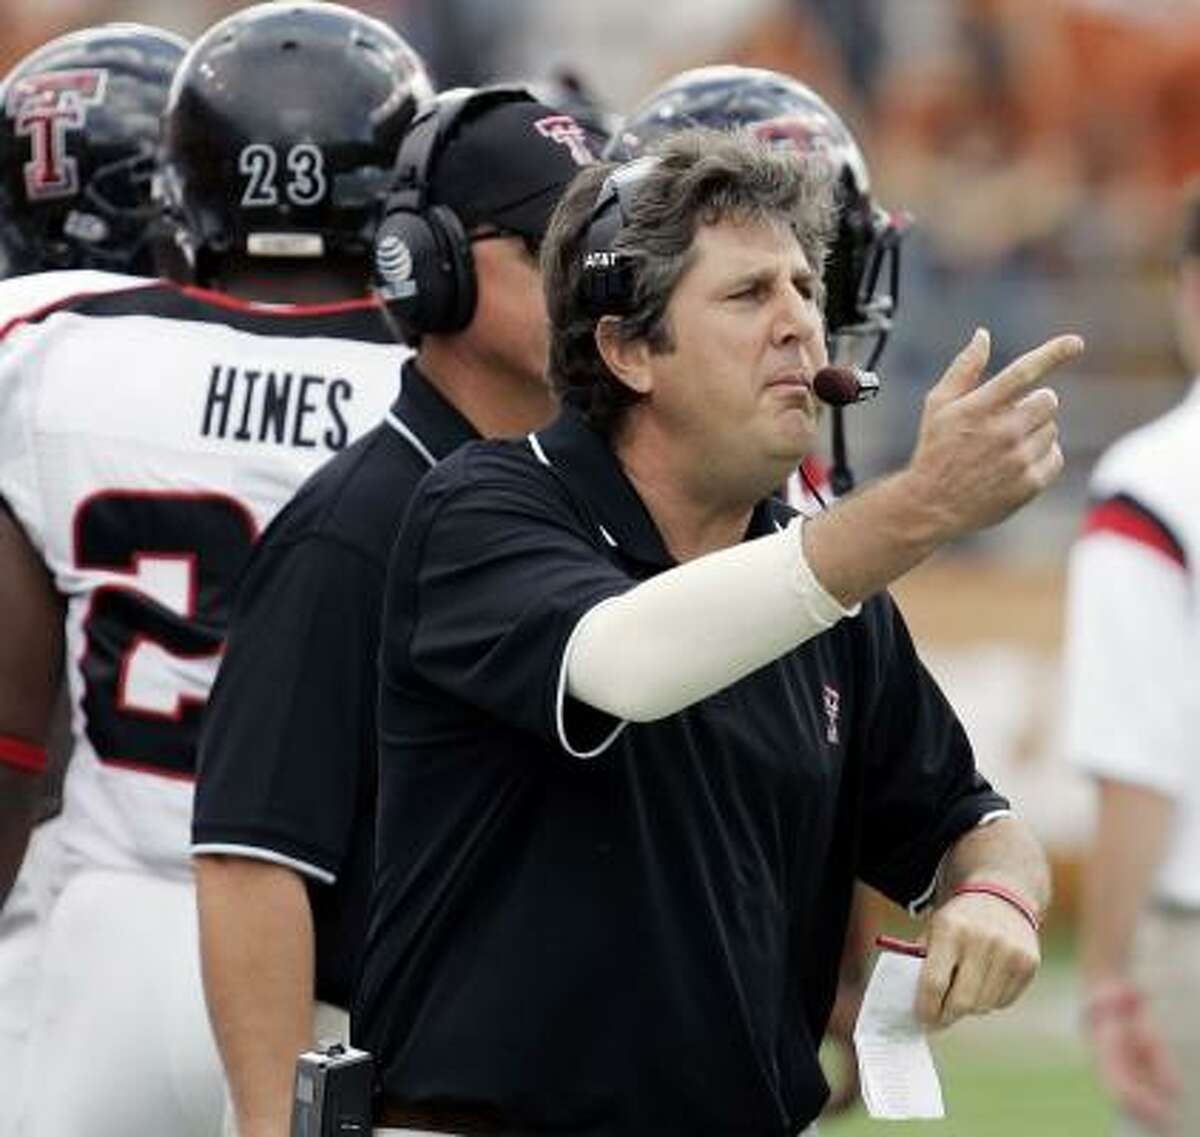 Surprising to some, coach Mike Leach, center, and his Texas Tech Red Raiders have a shot at the national title.